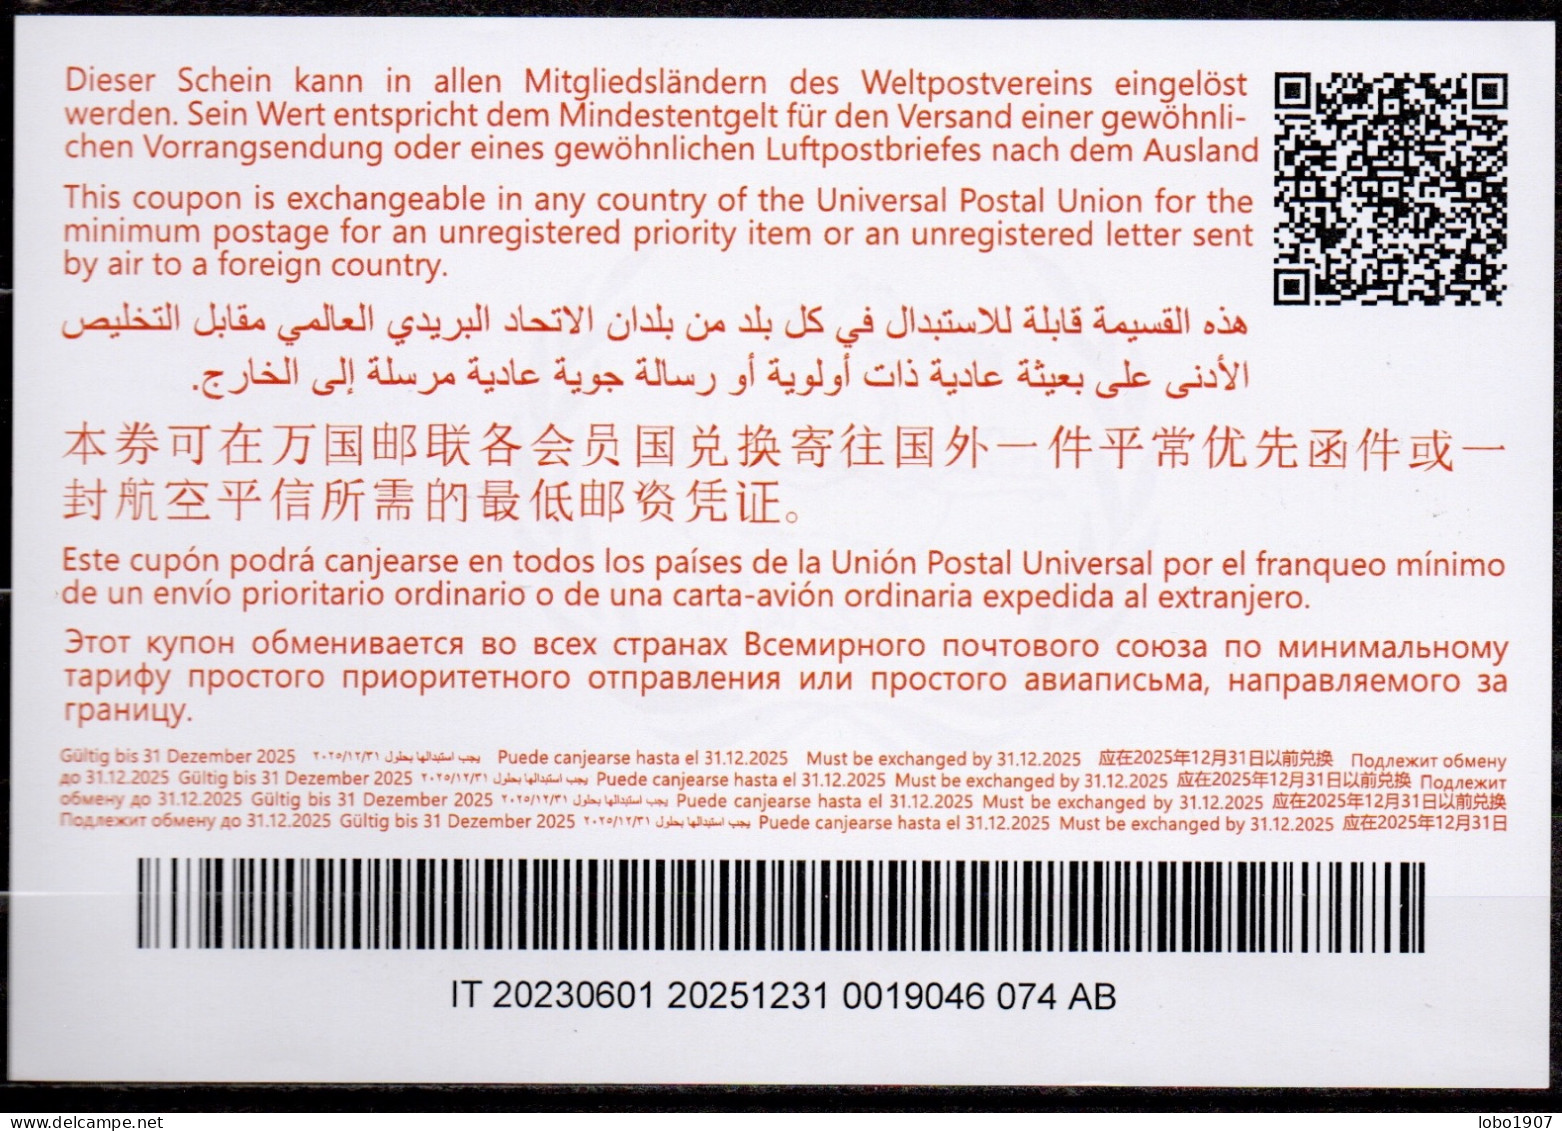 ITALIE ITALY ITALIA  Abidjan Special Issue Ab49  20230601 AB International Reply Coupon Reponse Antwortschein IRC IAS ** - Stamped Stationery